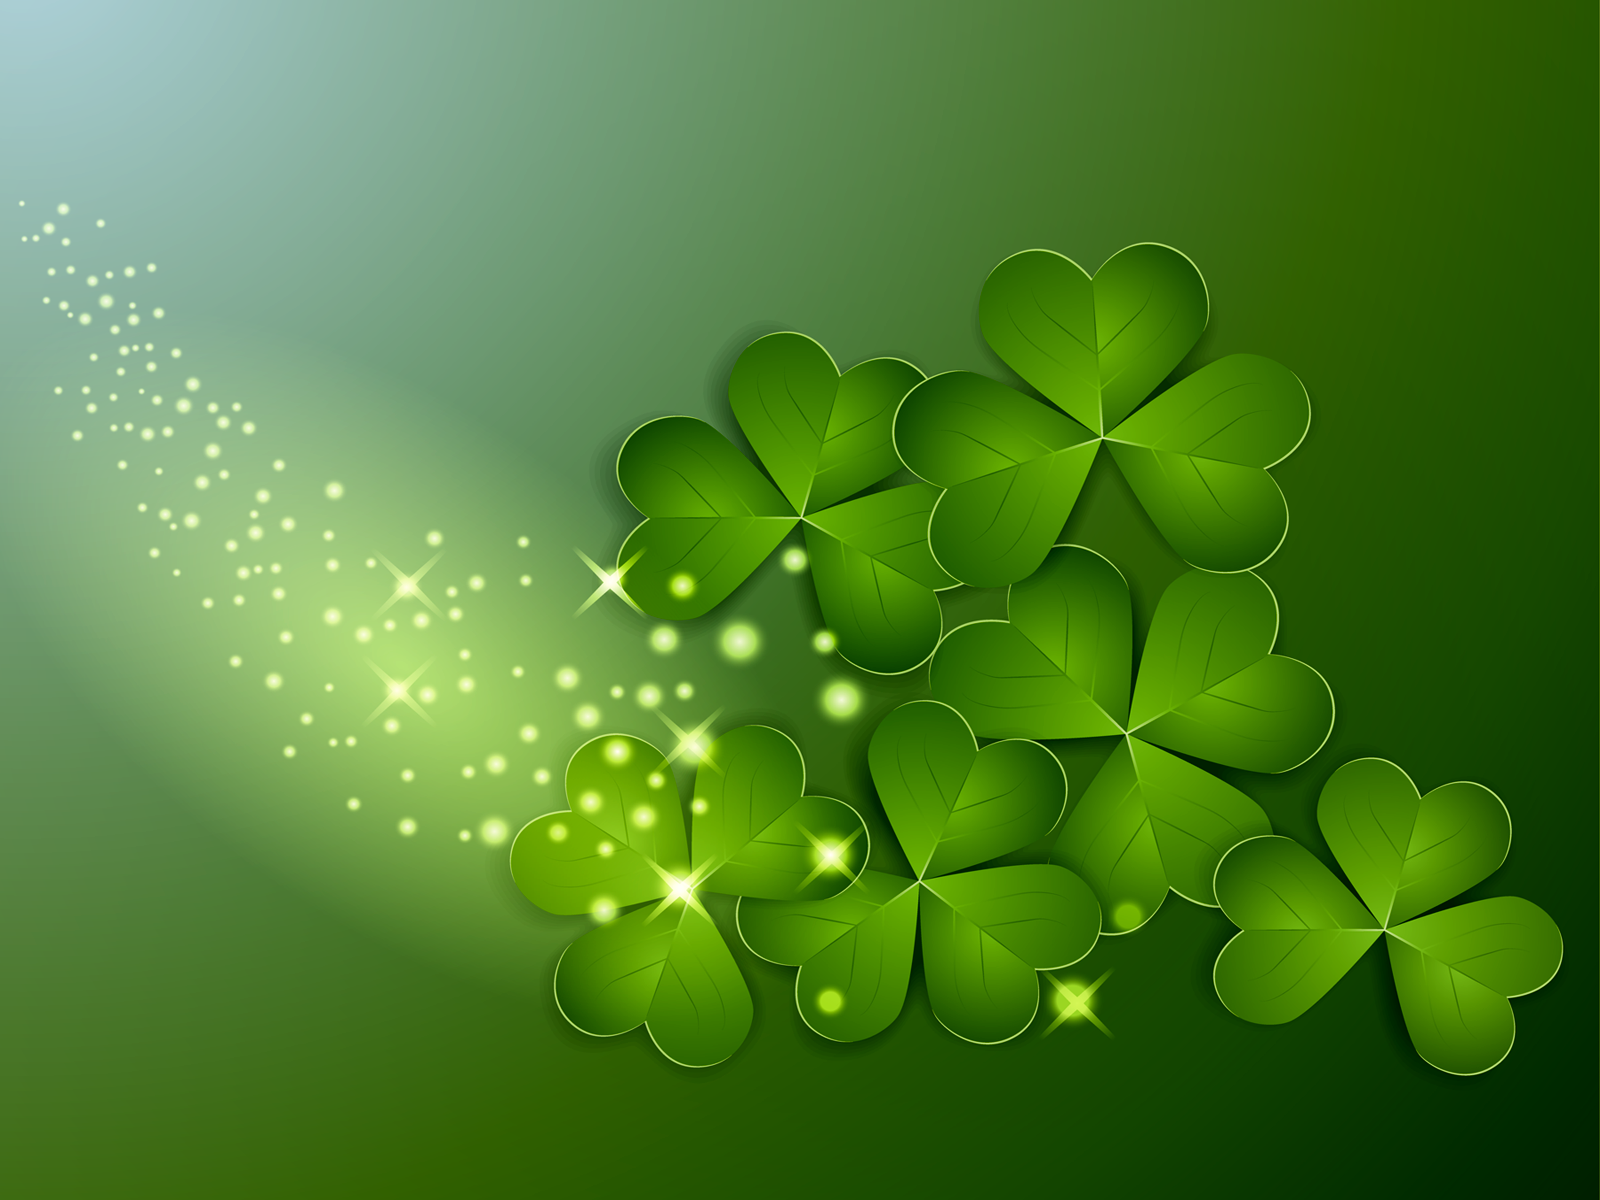 St Patrick's Day Wallpapers, Backgrounds for My PC, Desktop ...